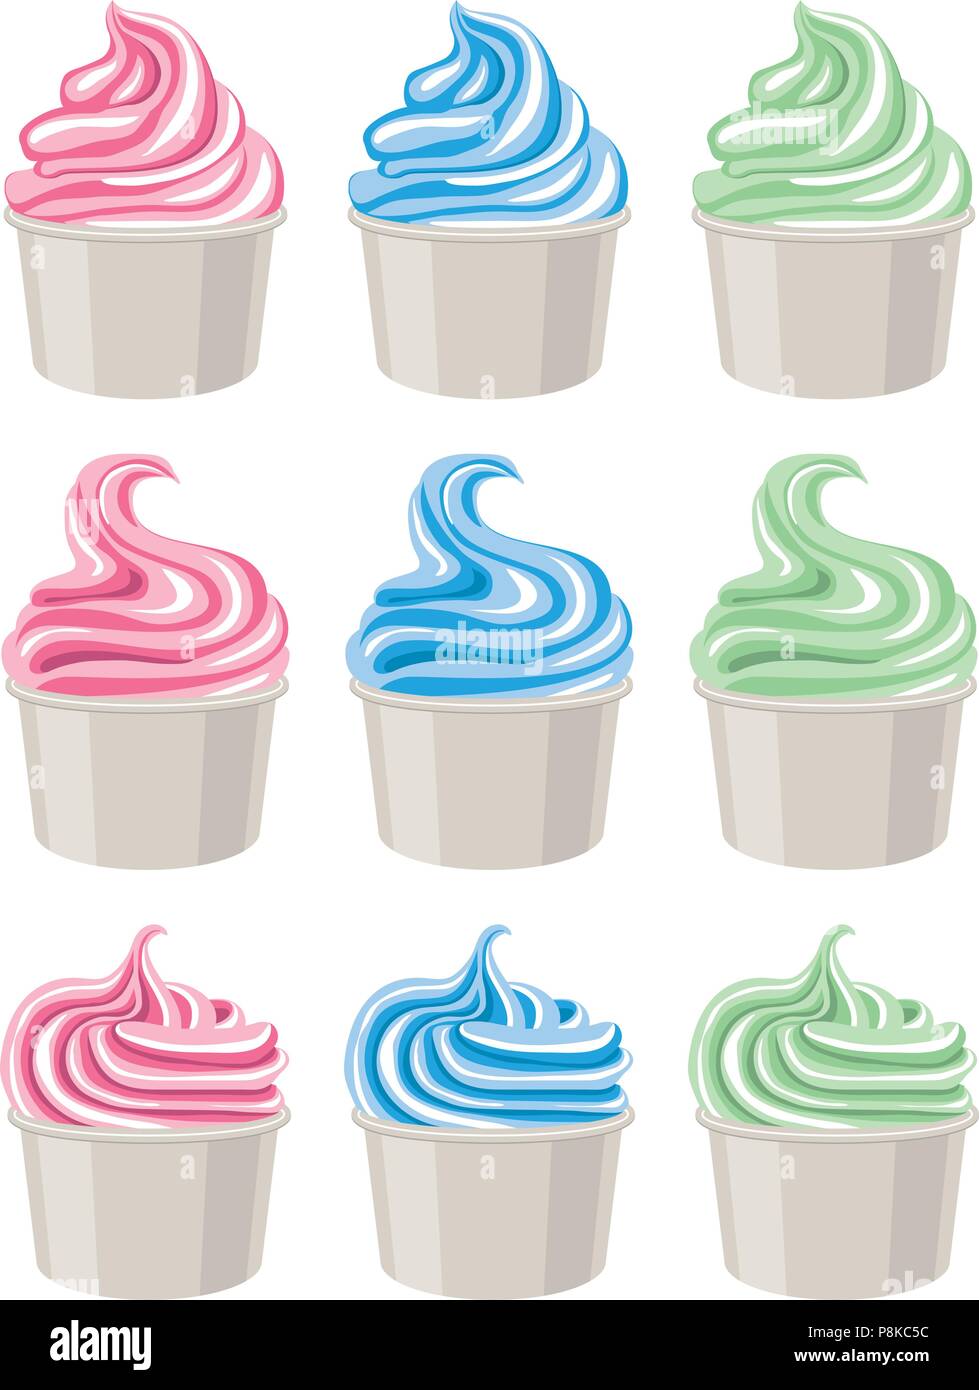 vector colorful icons of ice cream or yogurt in cups isolated on white background. whipped and frozen icecream or yogurts symbols Stock Vector